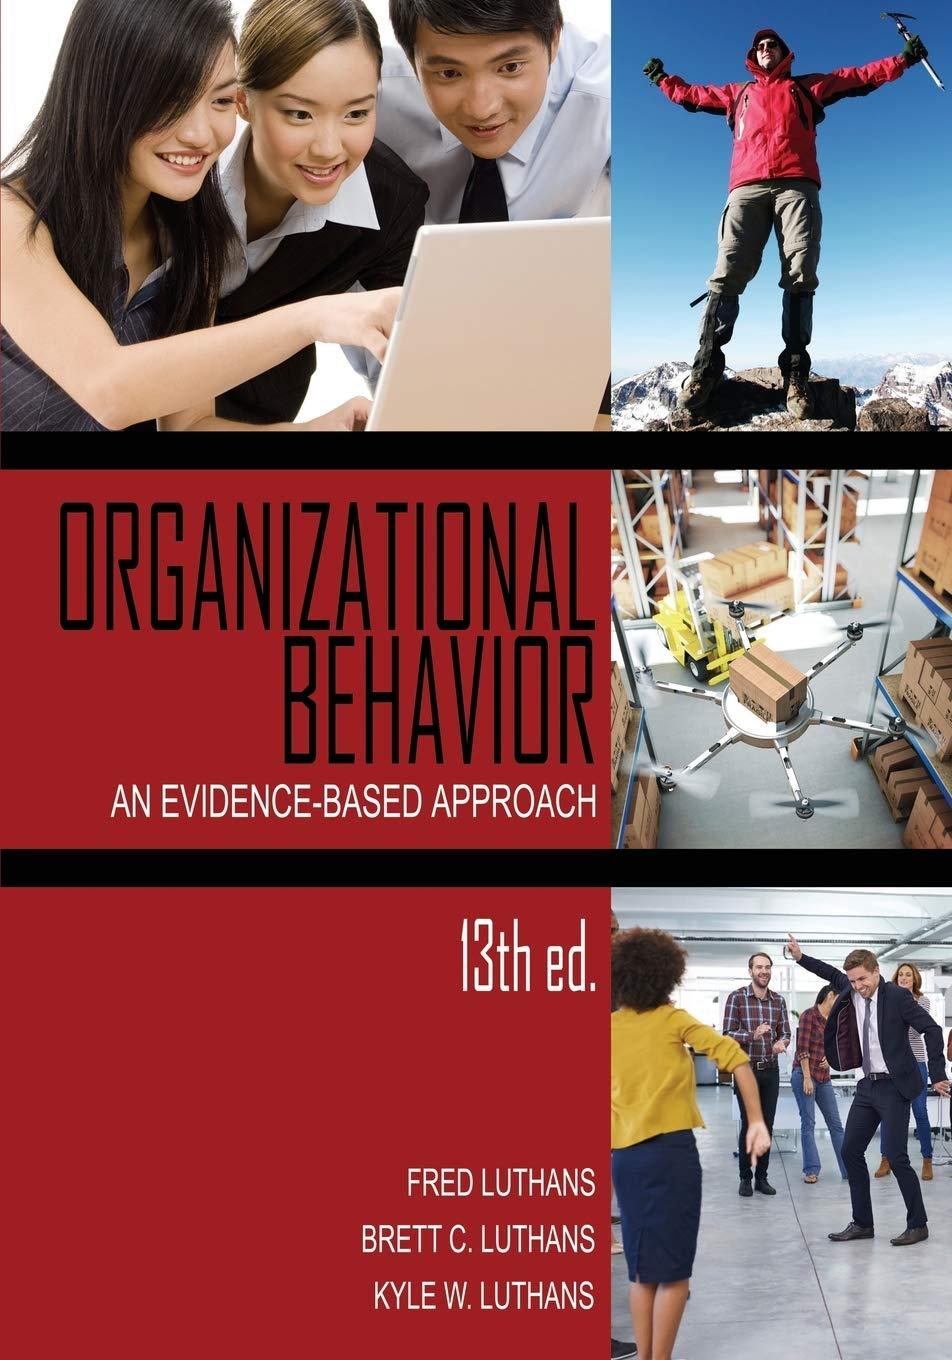 organizational behavior an evidence based approach 13 edition fred luthans, brett c. luthans, kyle w. luthans